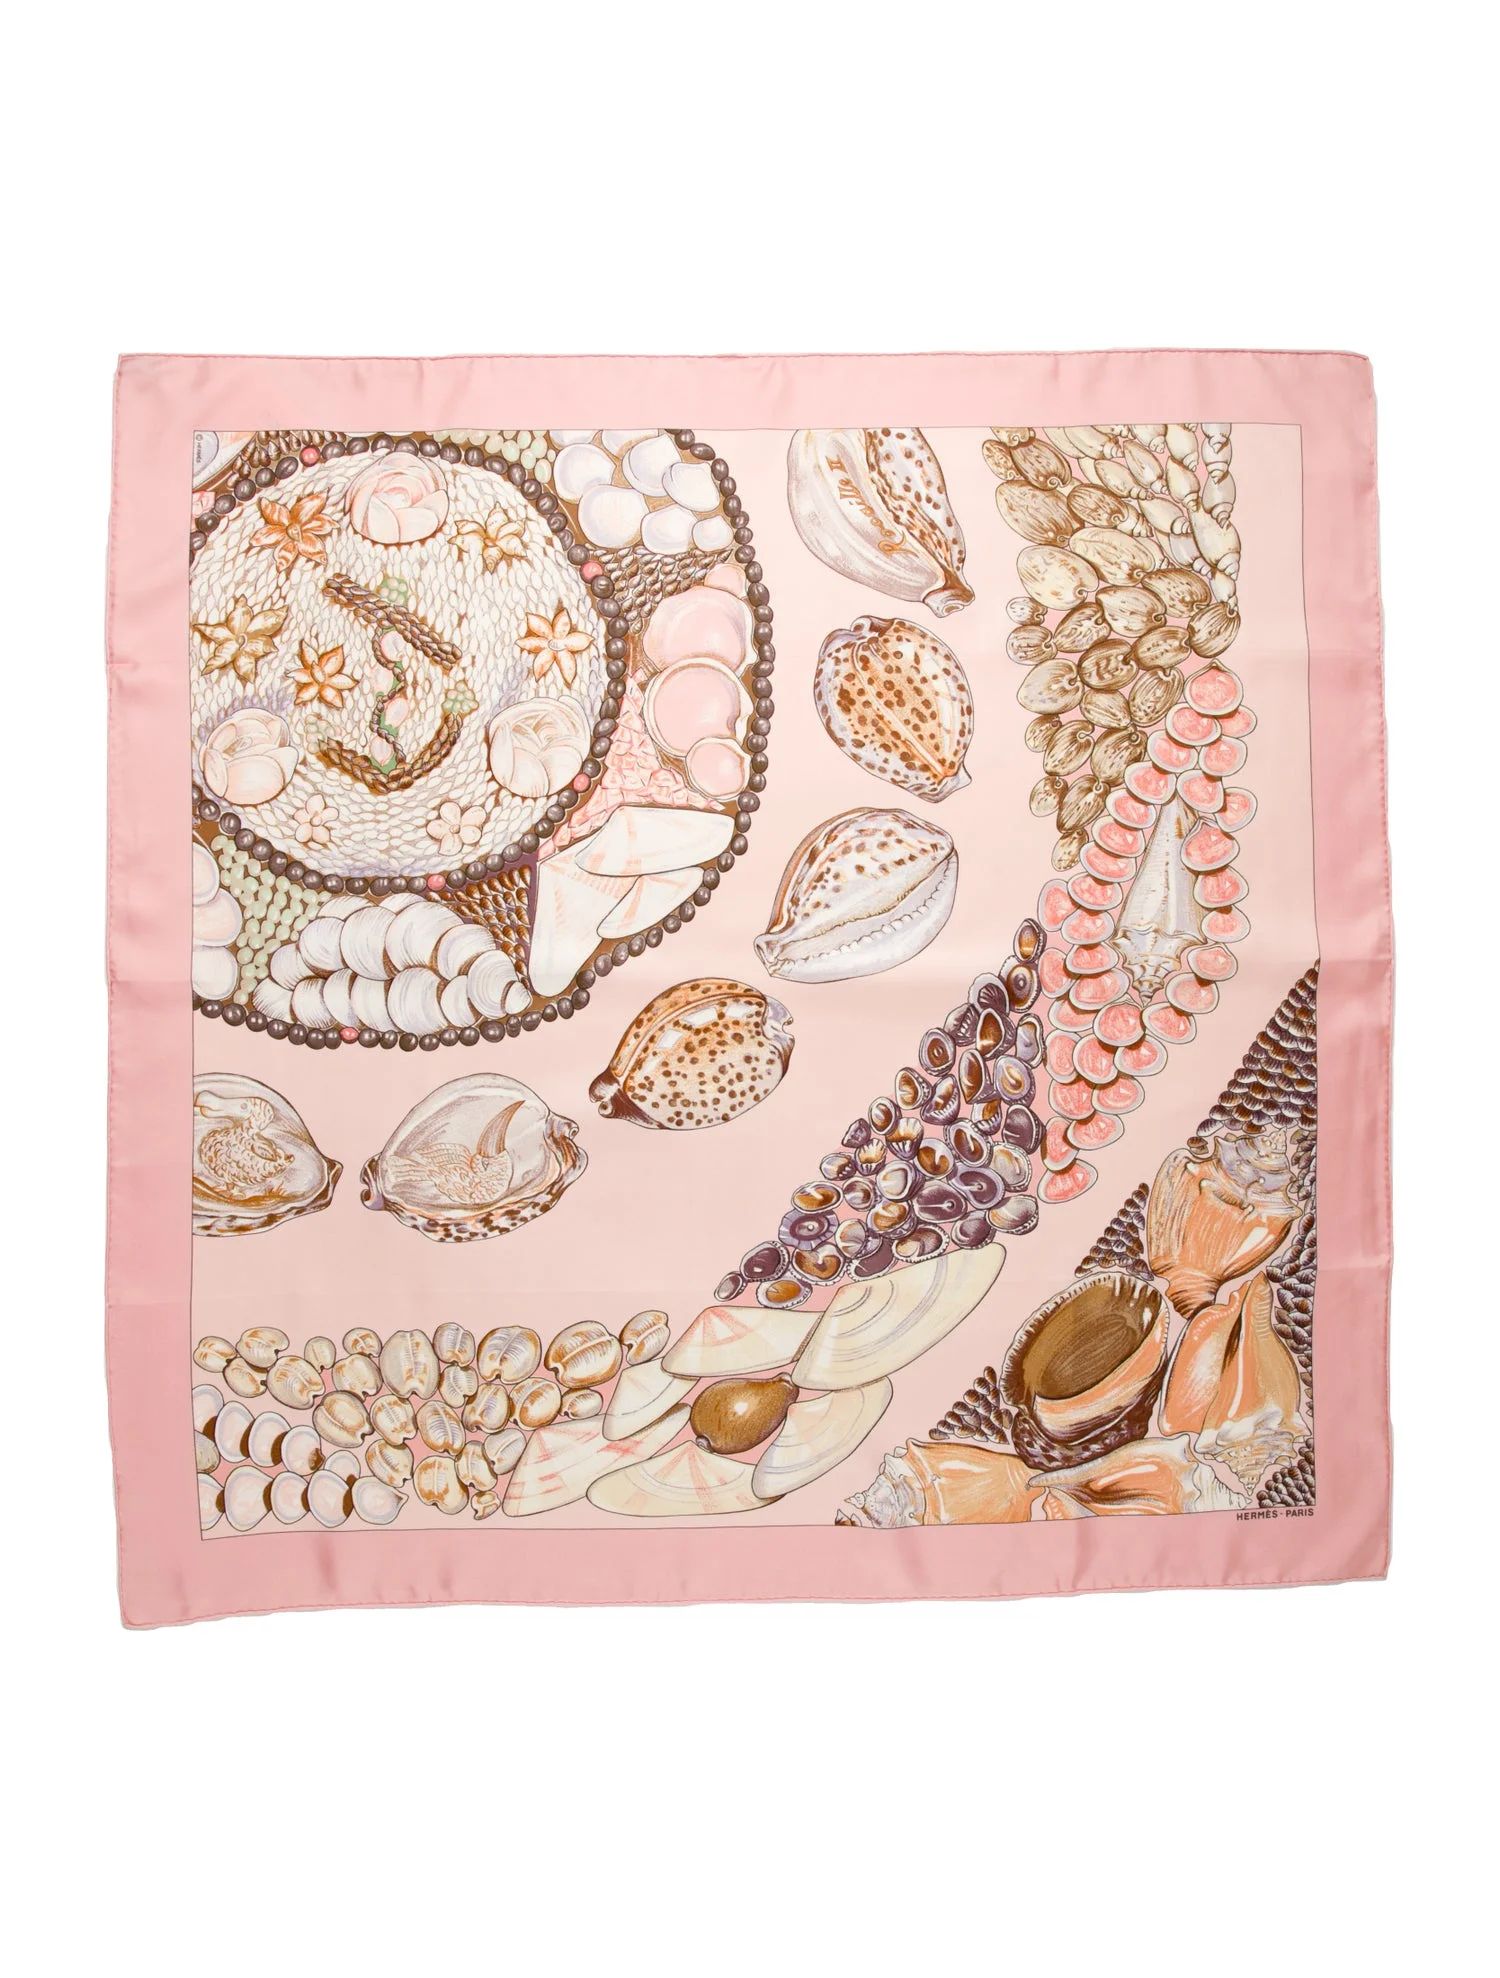 Rocaille II Silk Scarf | The RealReal